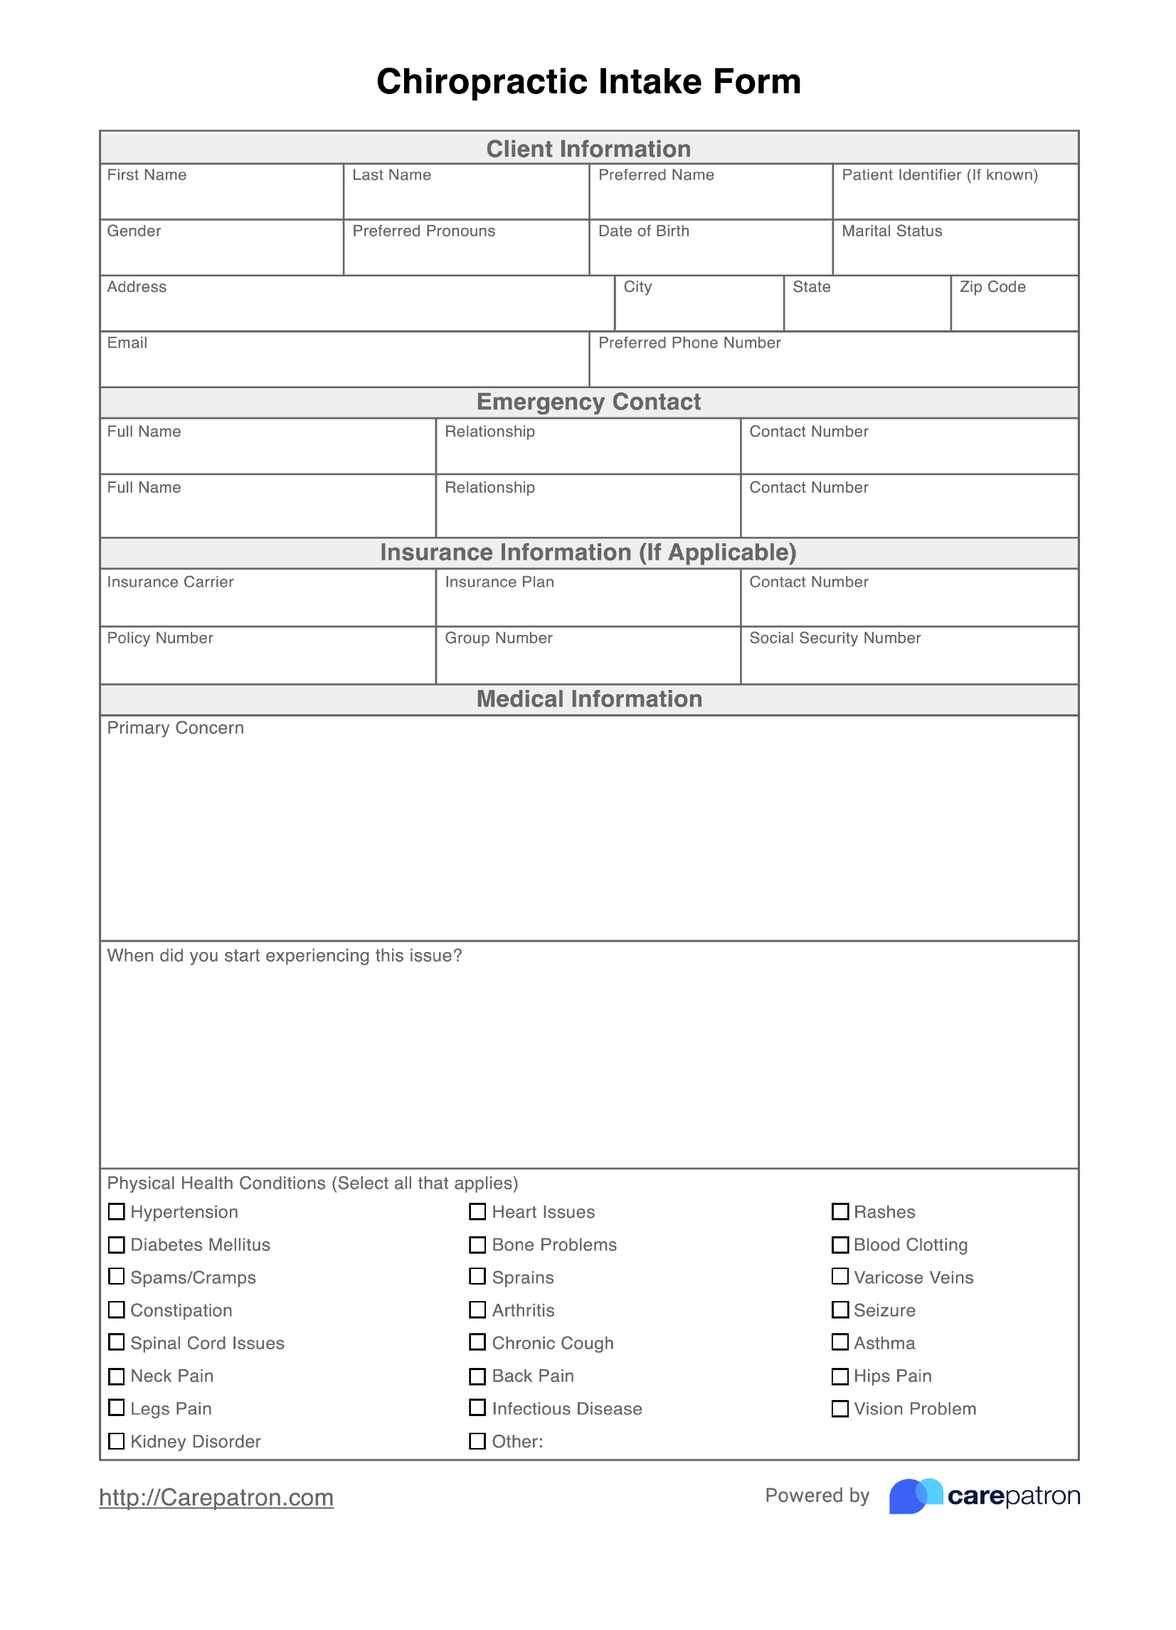 Chiropractic Intake Form PDF Example